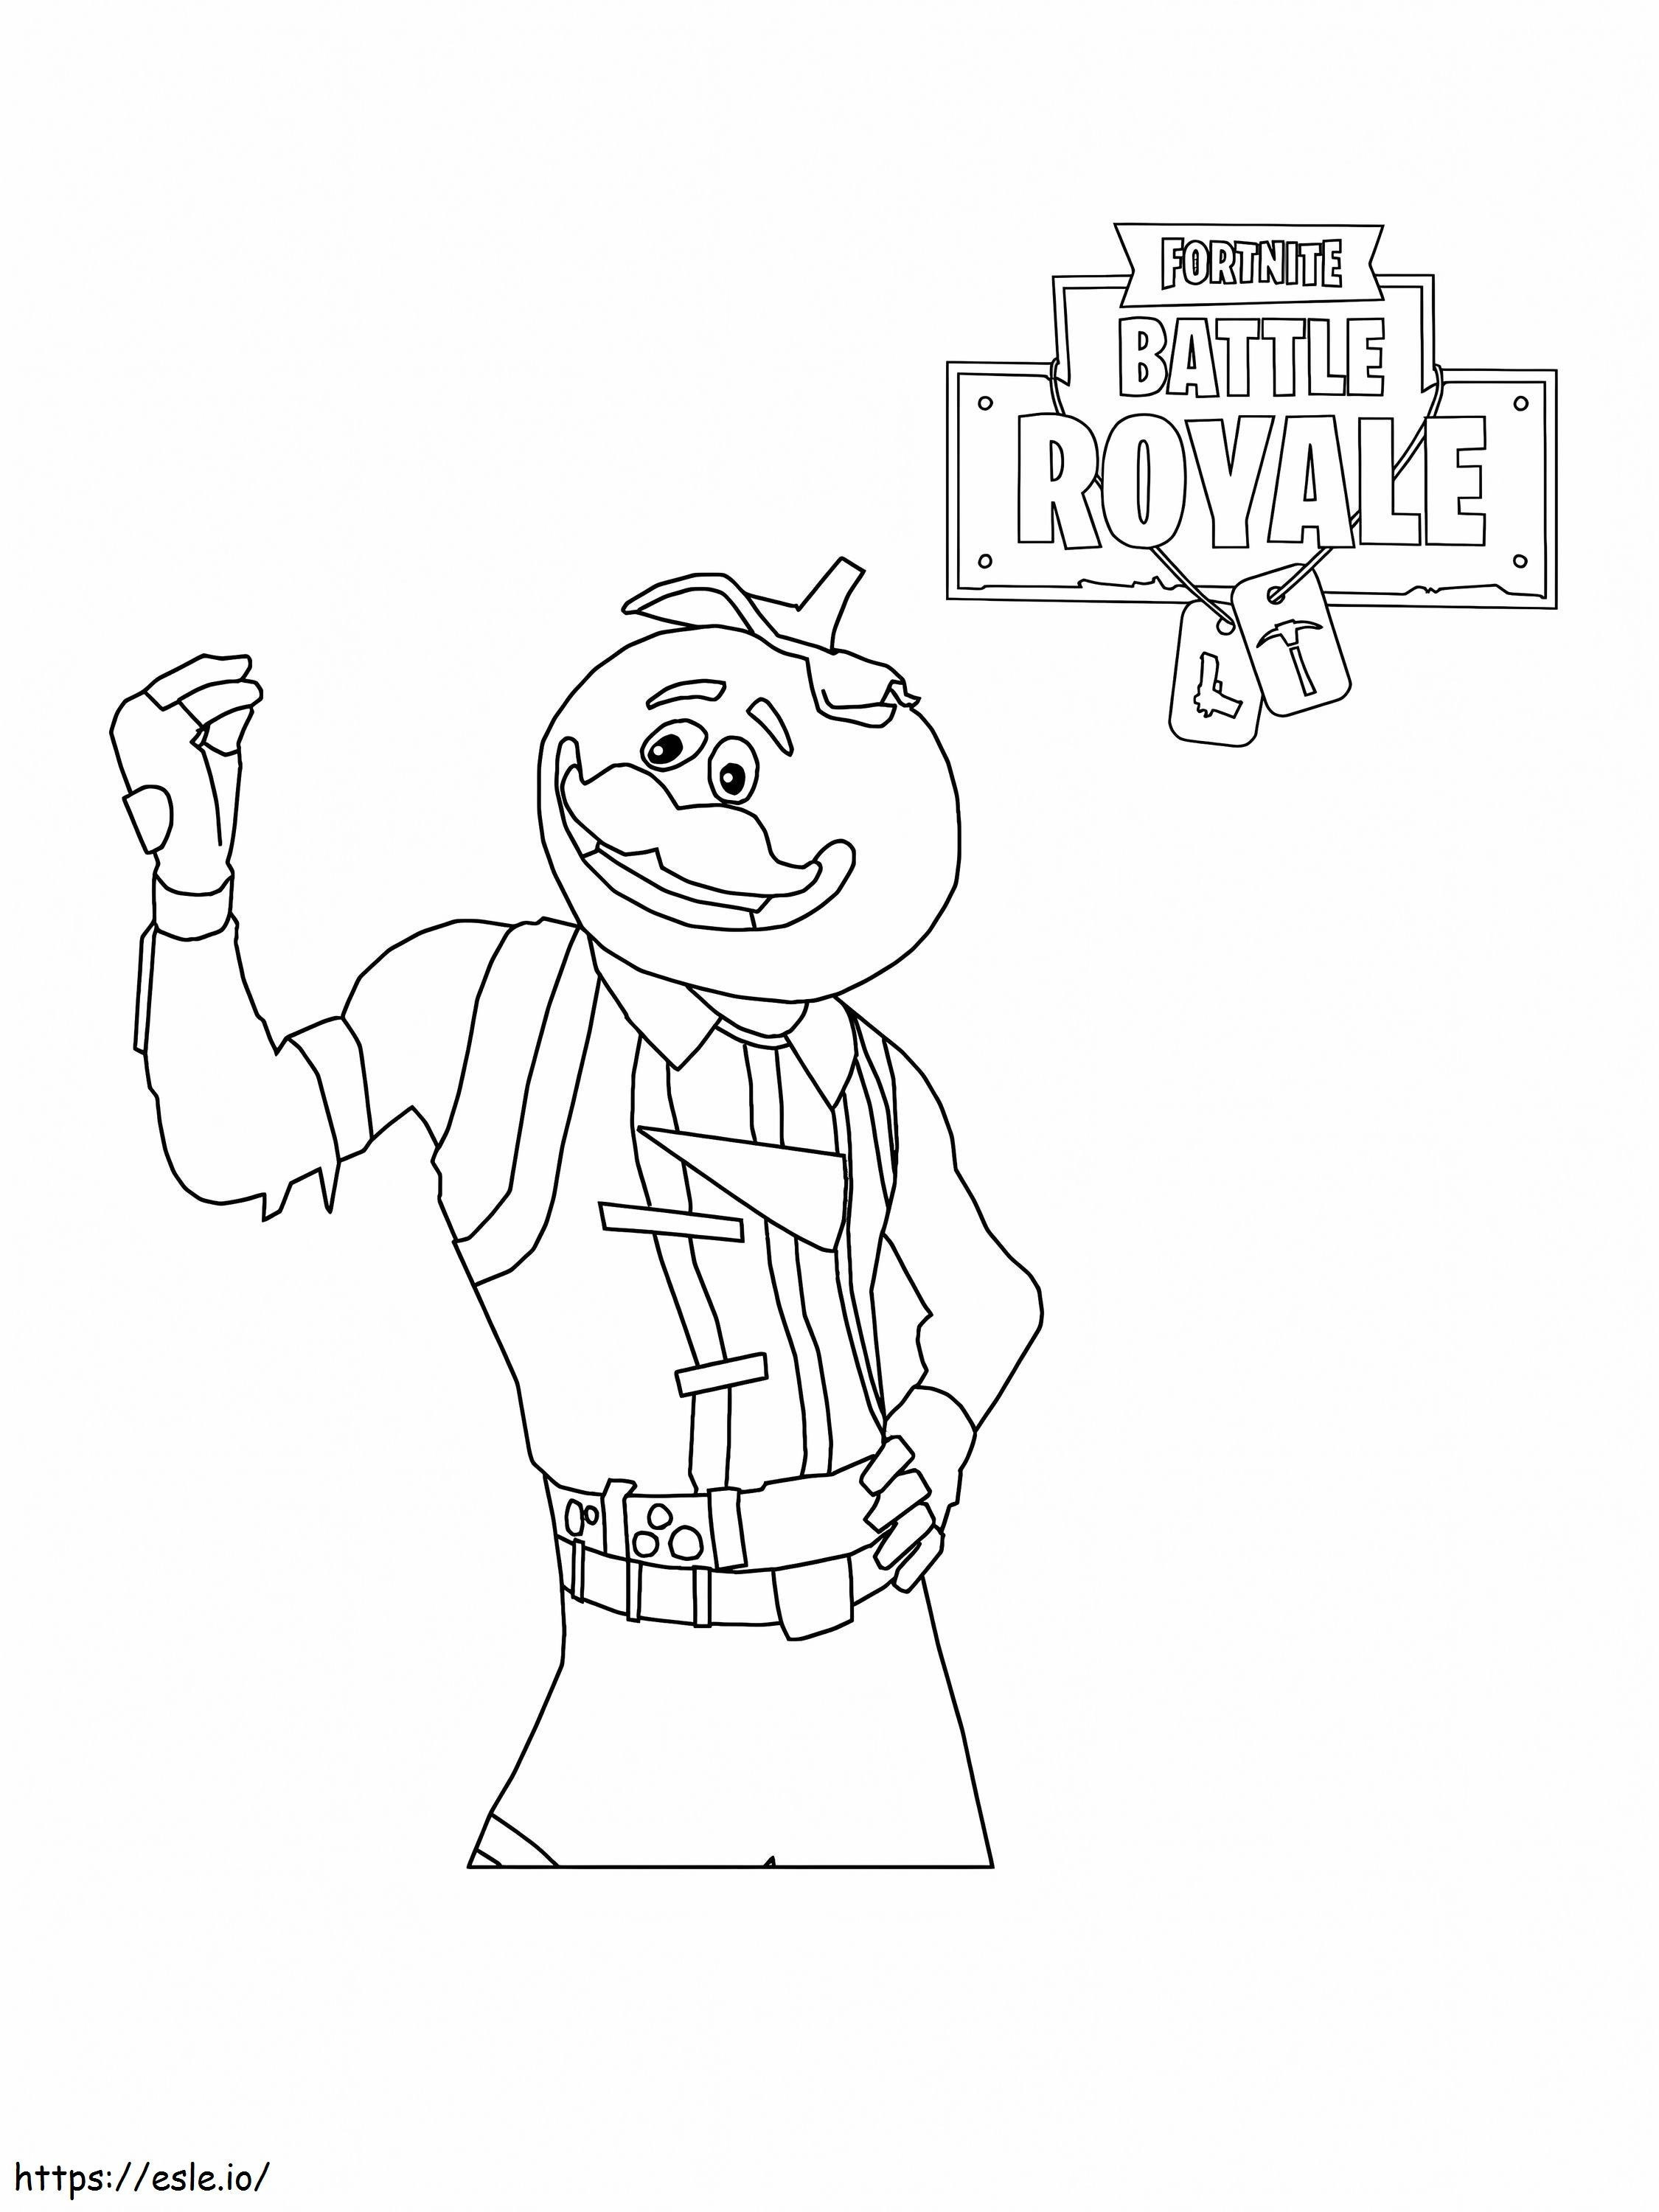 1540525355 Free Fortnite coloring page